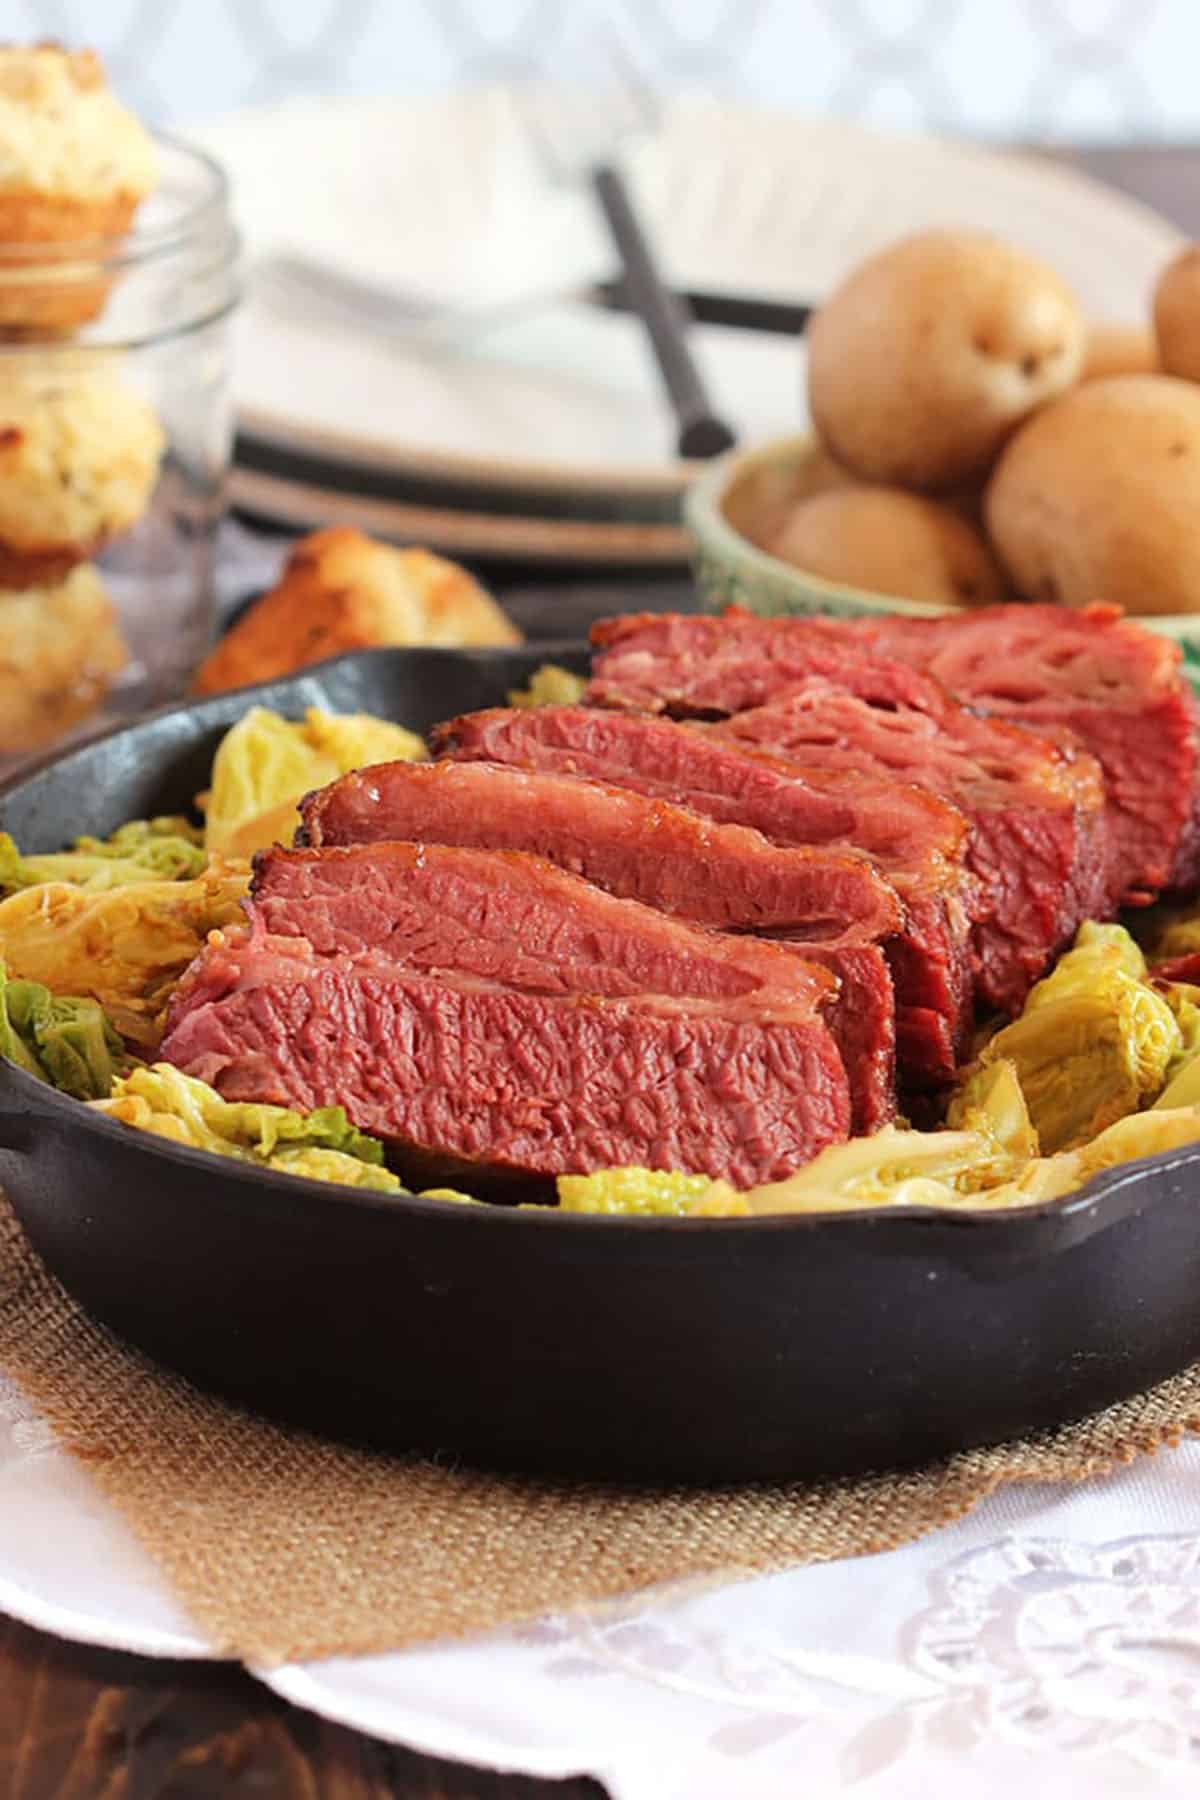 sliced corned beef on a bed of cabbage in a cast iron skillet with muffins in the background.